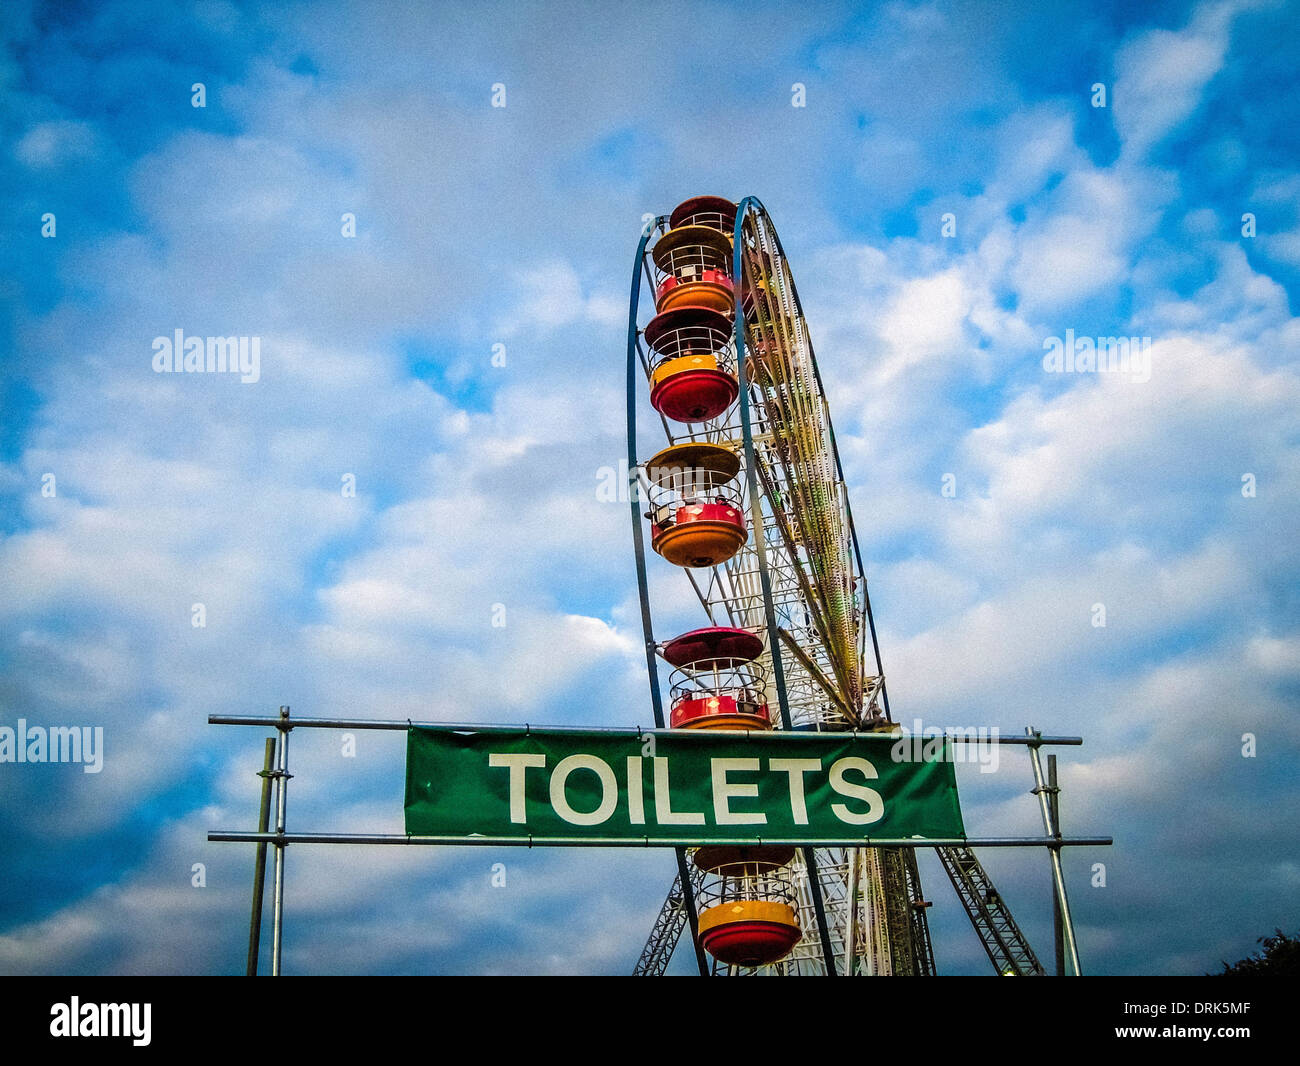 Big wheel fairground ride and Toilets sign at music festival Stock Photo